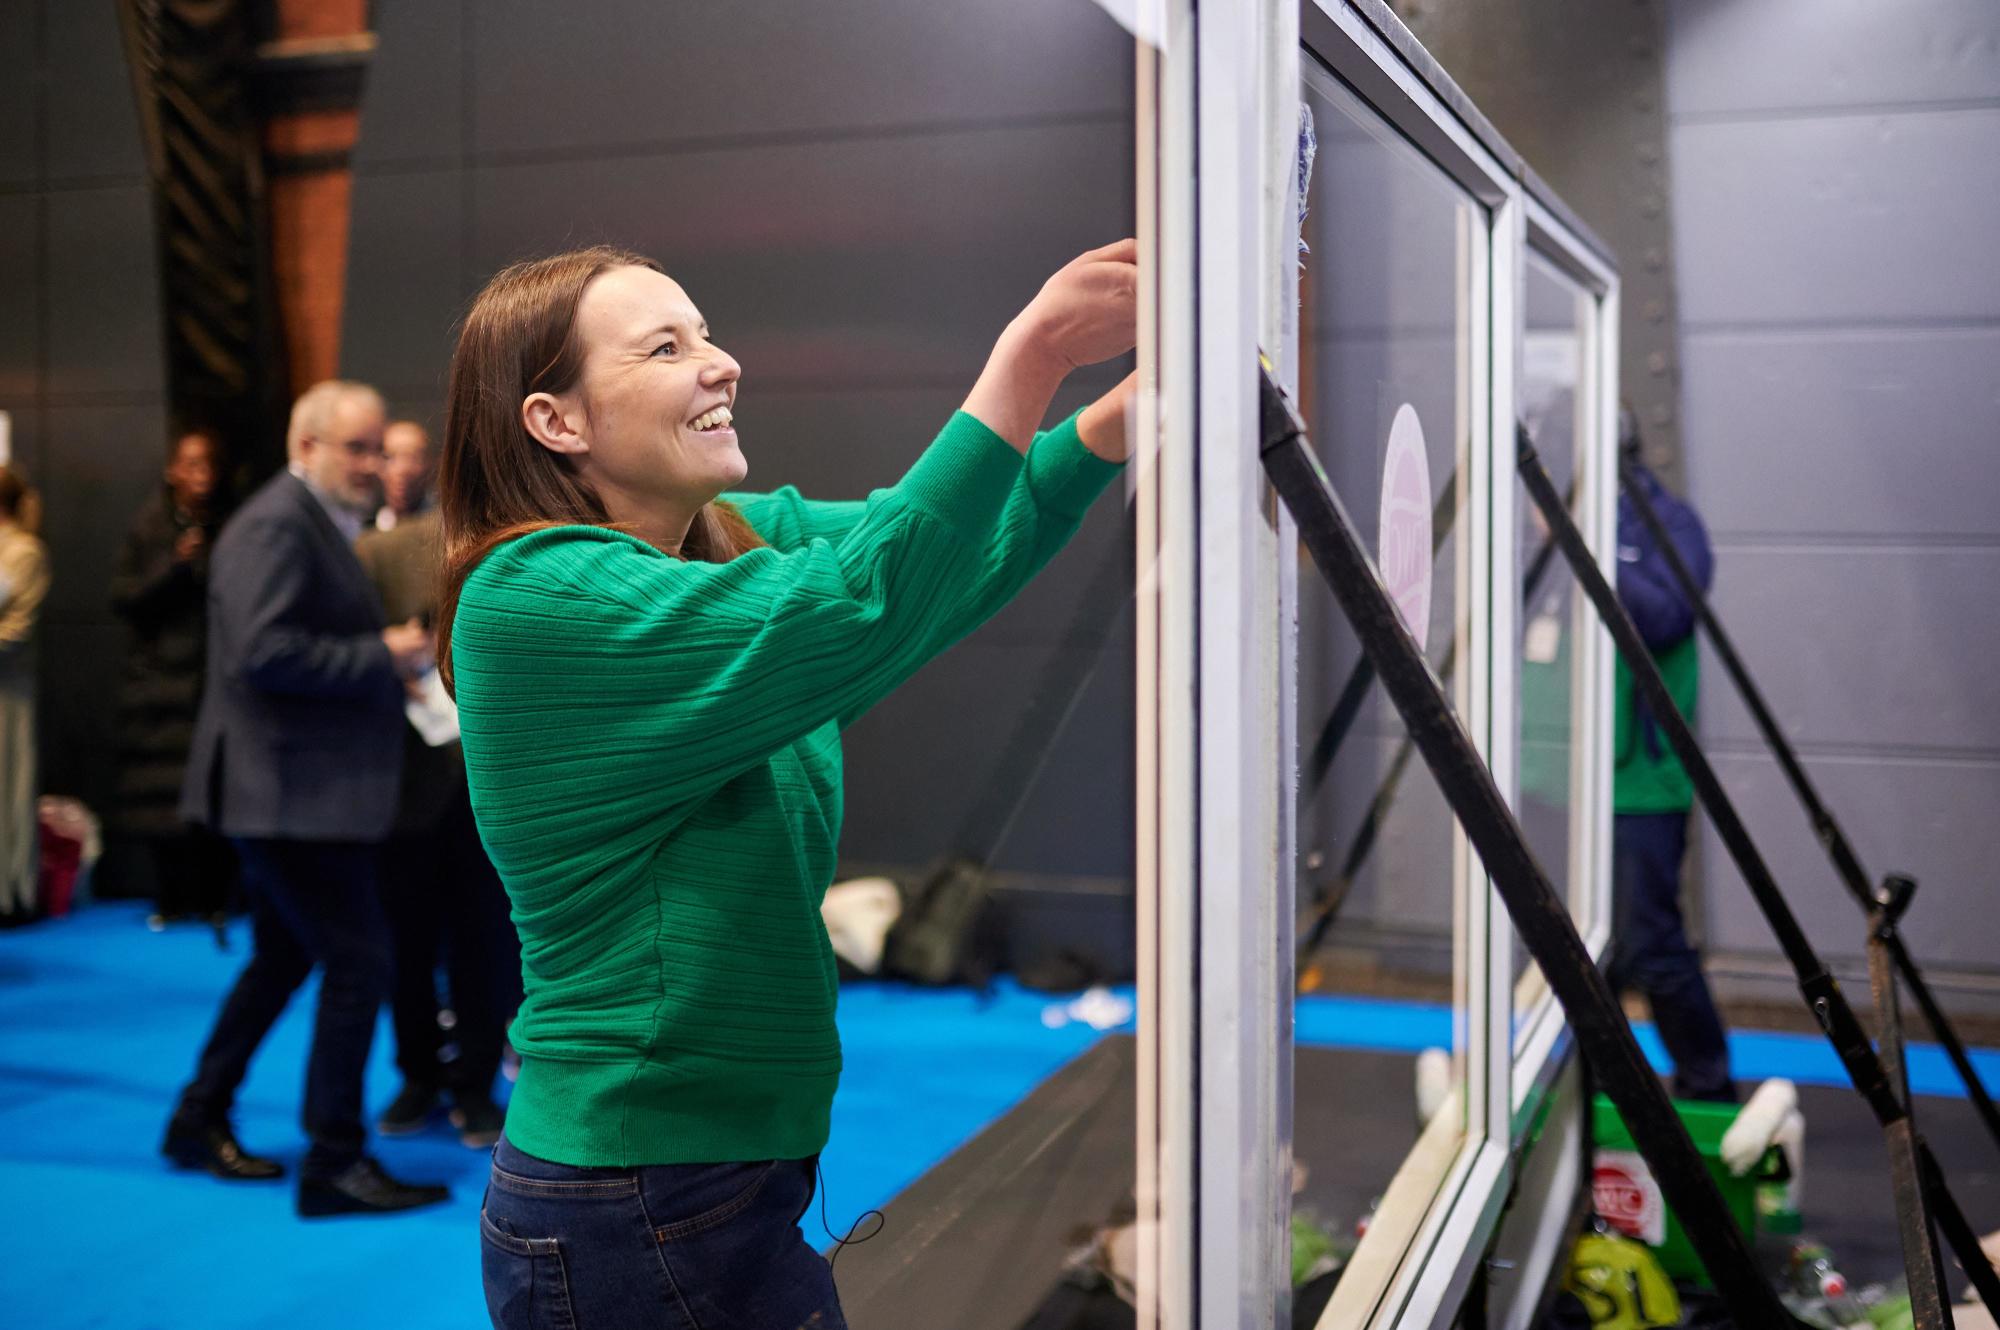 Manchester Cleaning Show Celebrates Record Attendee Numbers